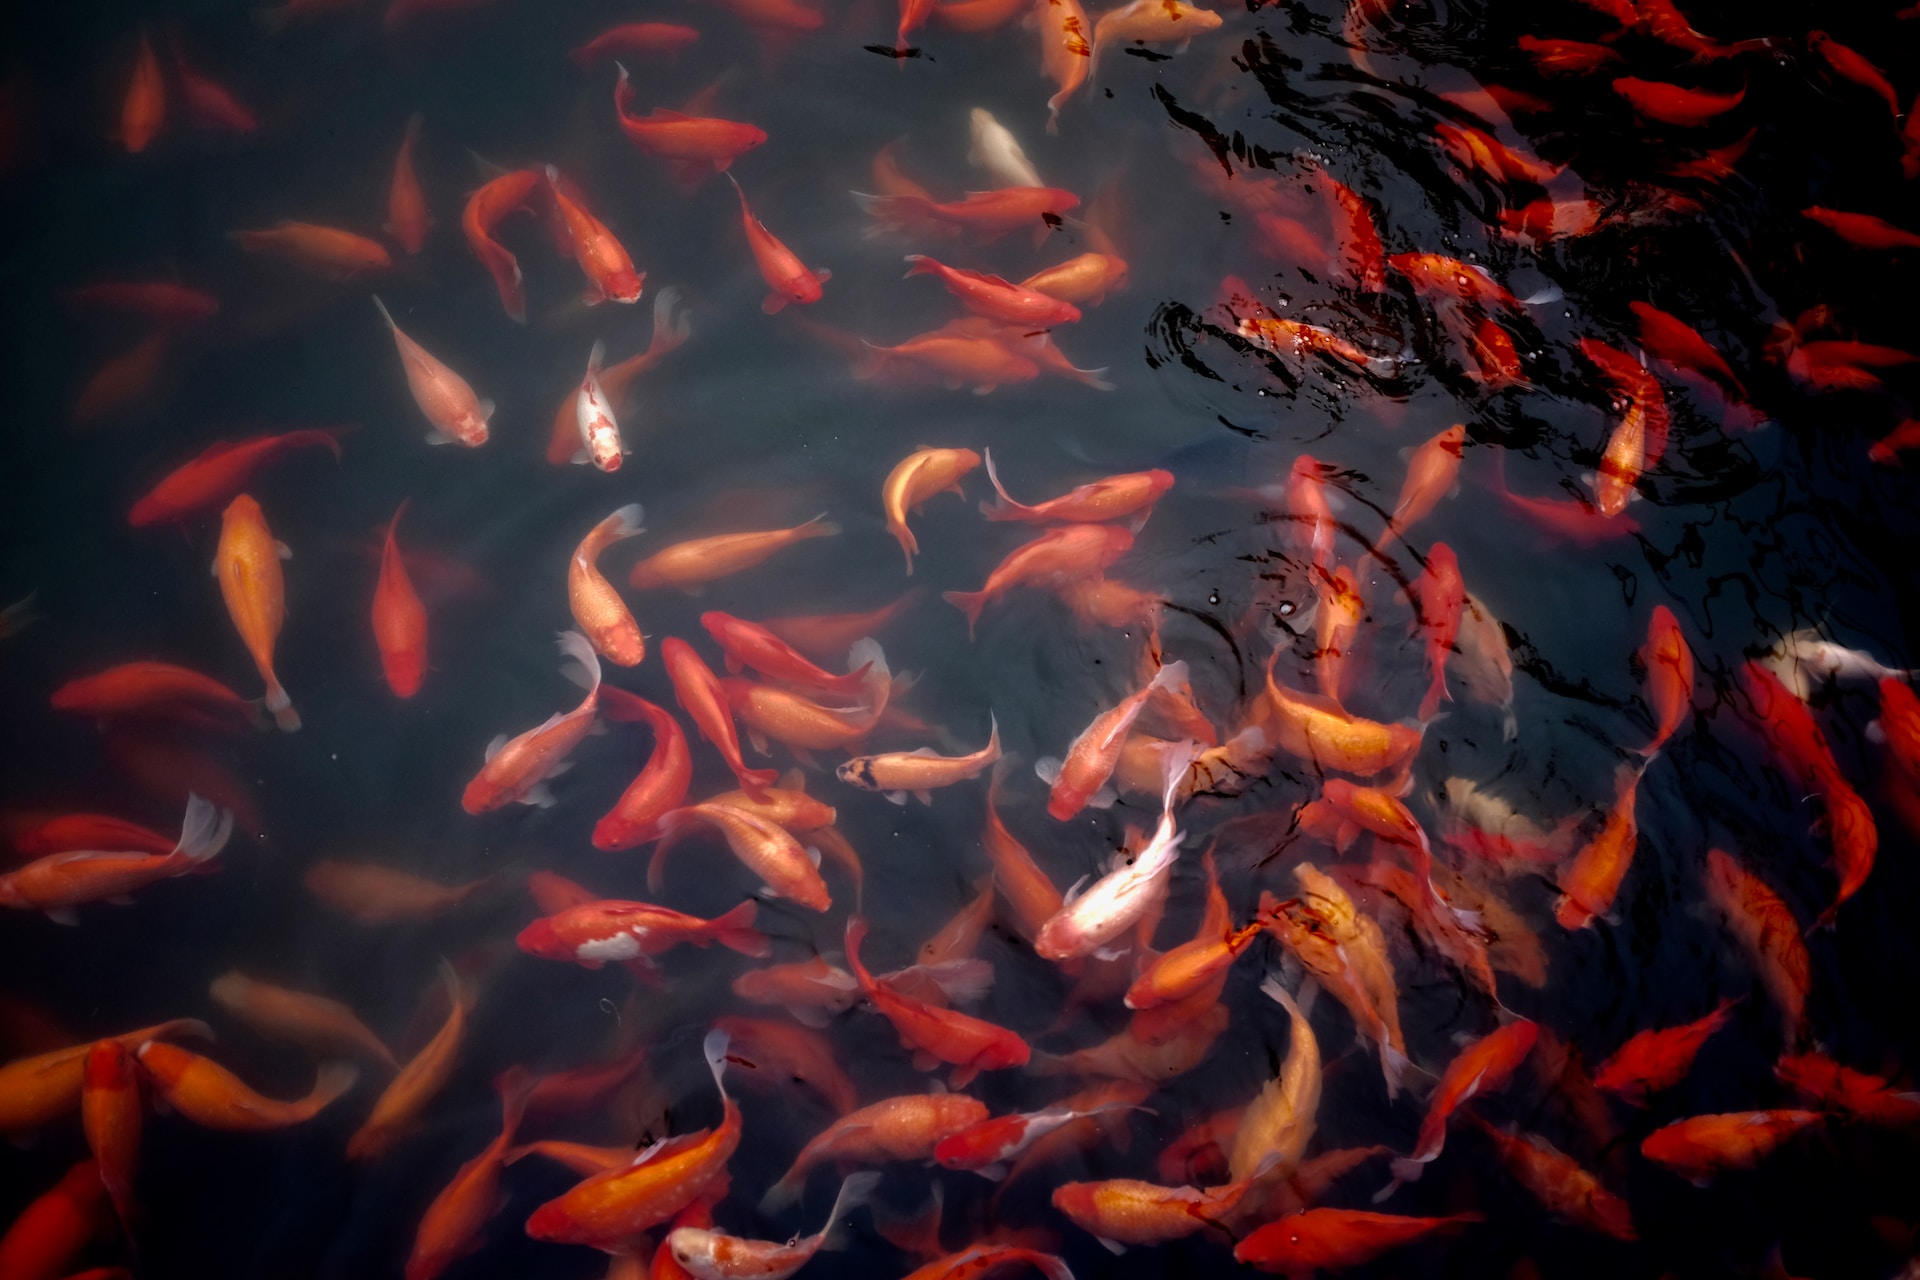 Fish in a pond.